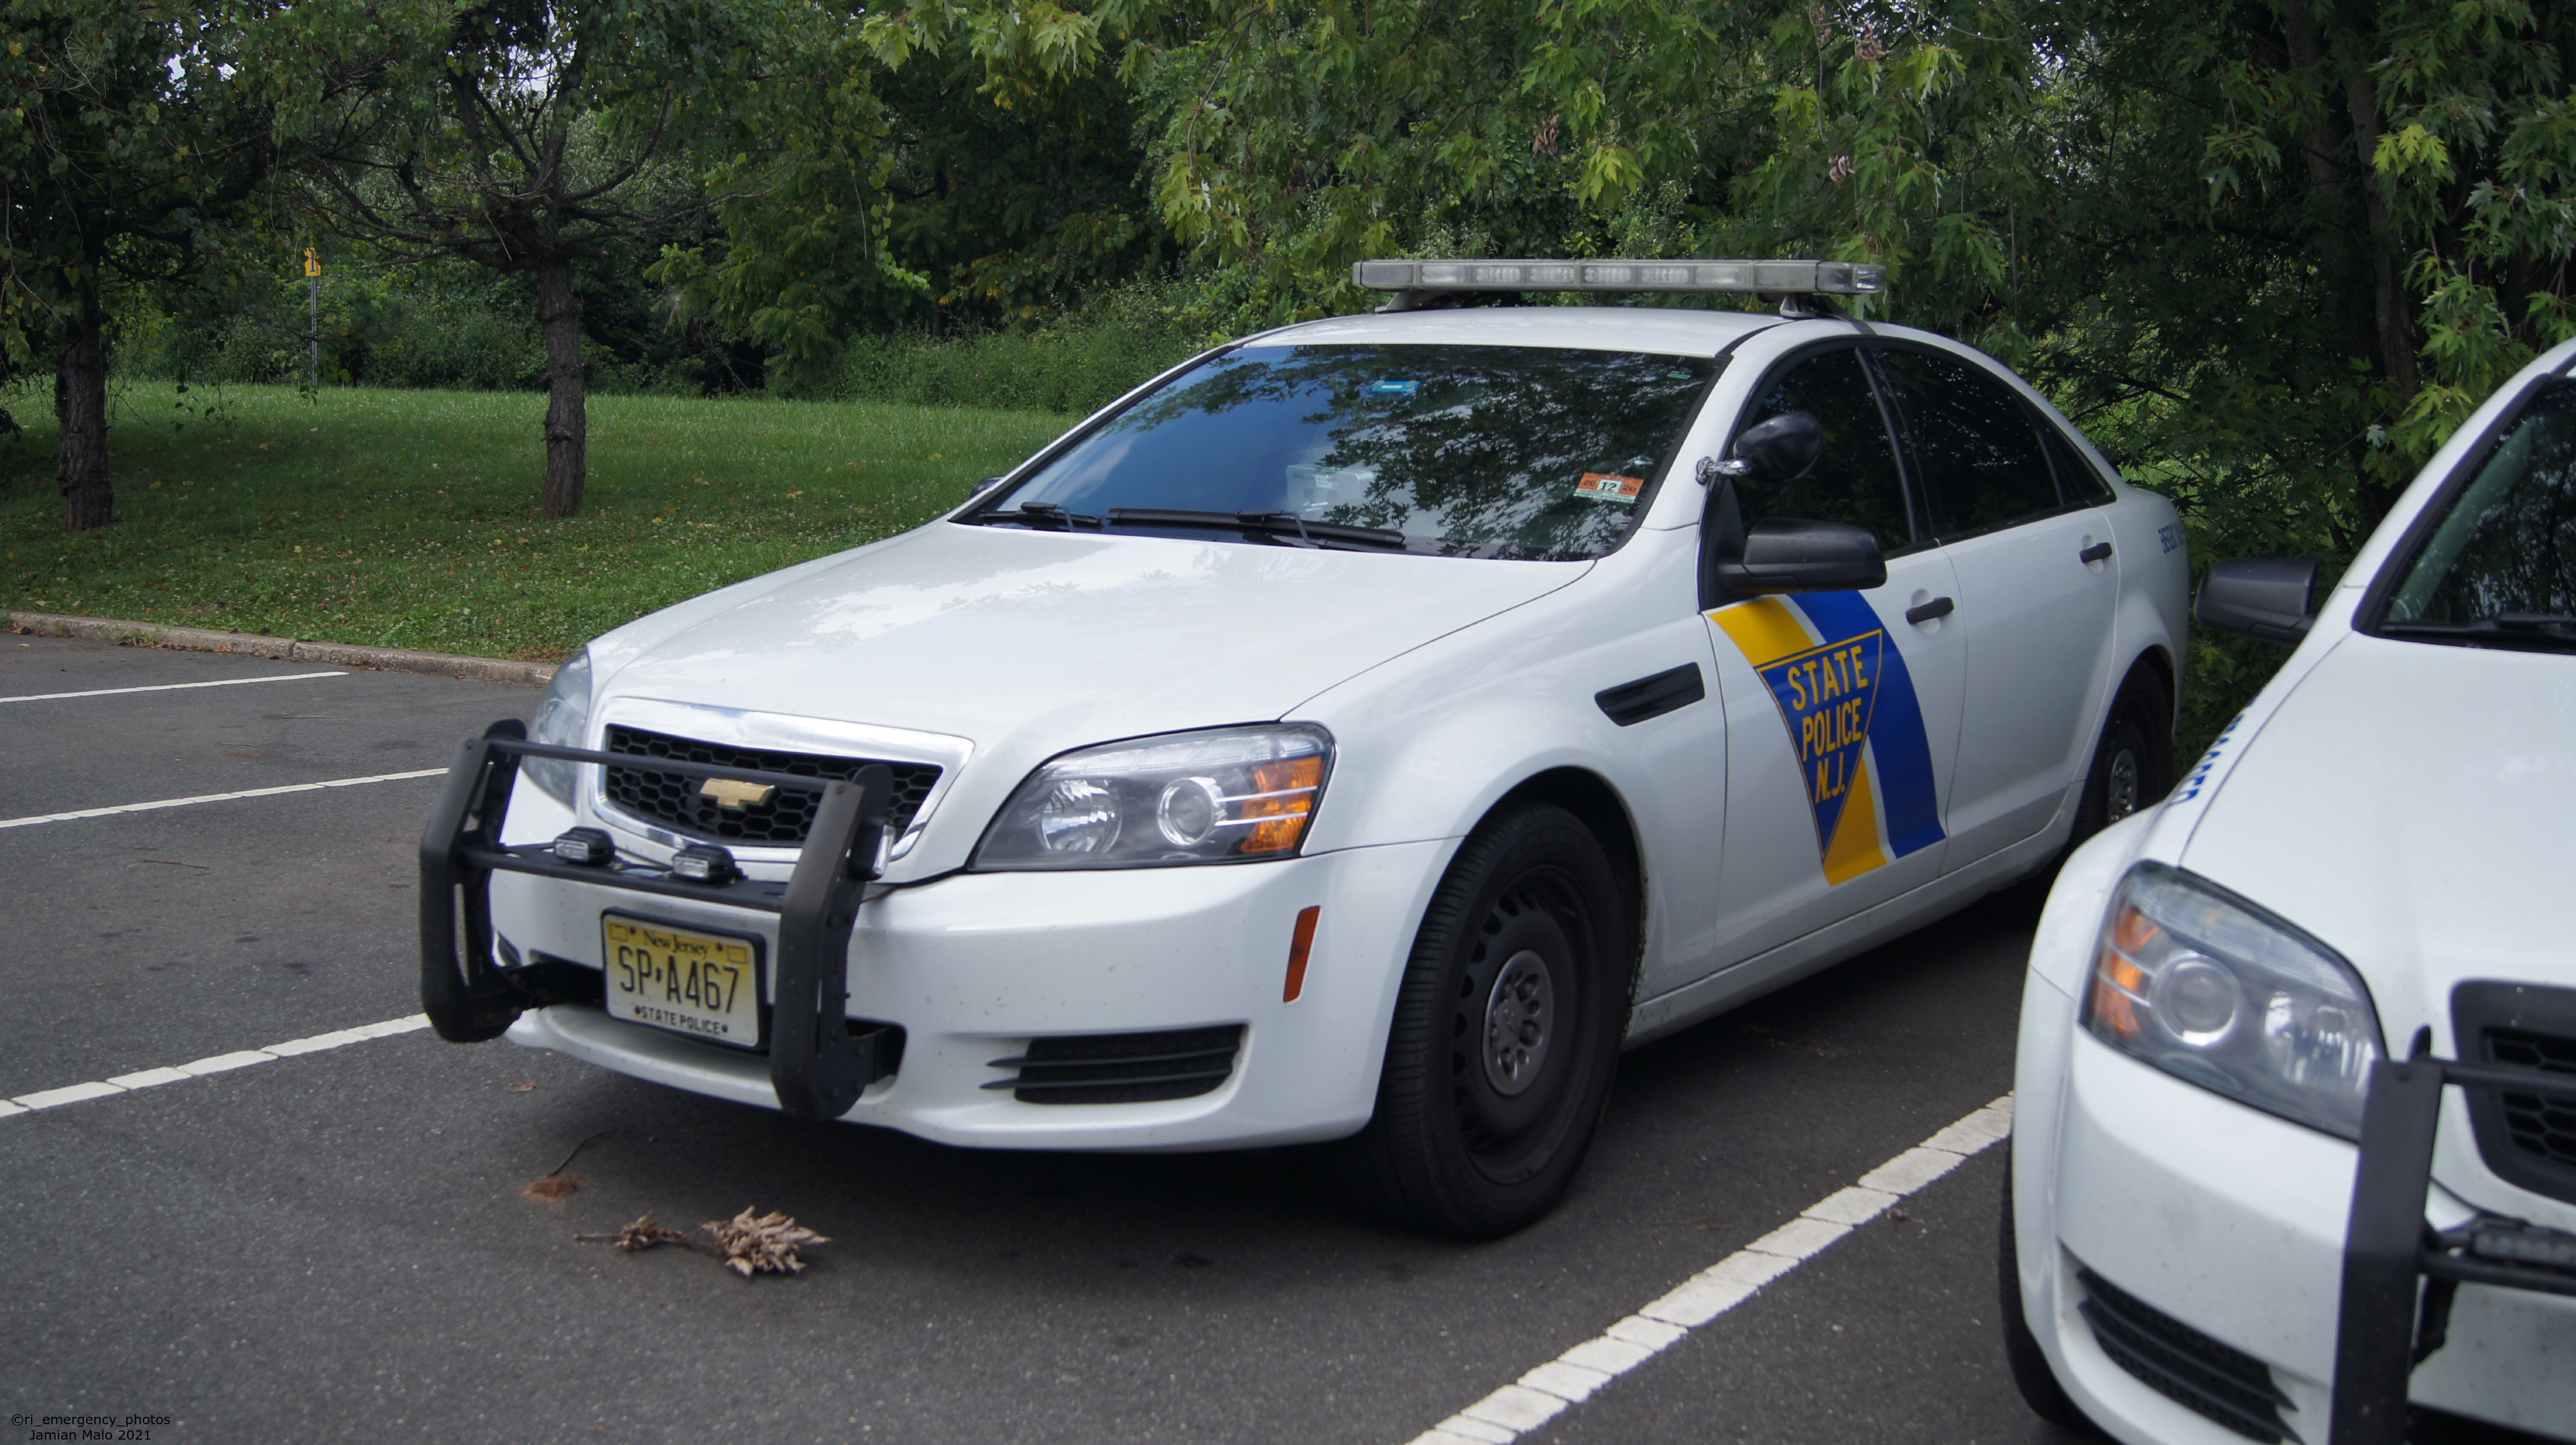 A photo  of New Jersey State Police
            Cruiser 467, a 2011-2017 Chevrolet Caprice             taken by Jamian Malo